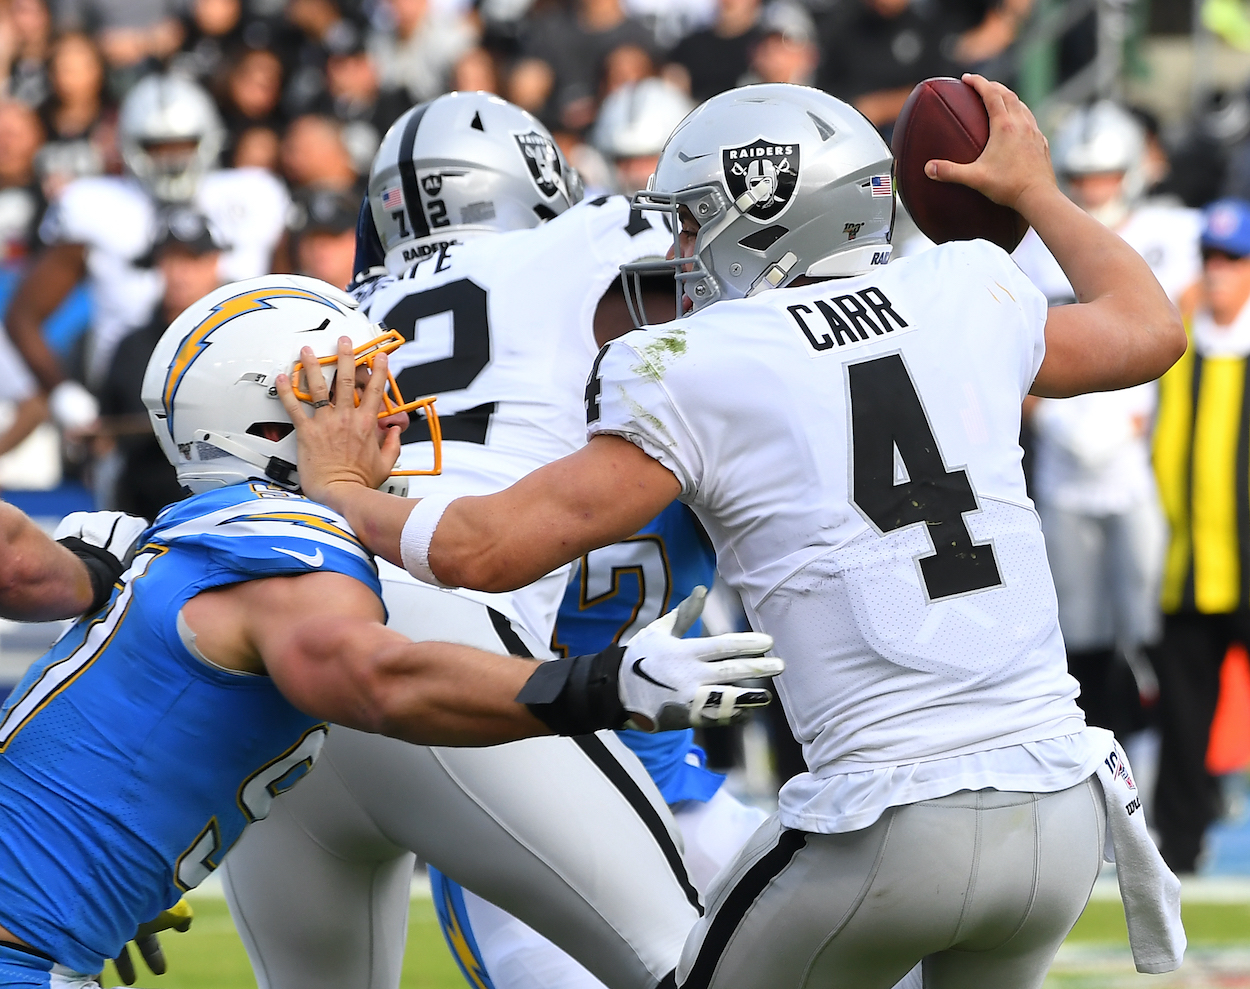 Quarterback Derek Carr of the Oakland Raiders is sacked by defensive end Joey Bosa of the Los Angeles Chargers in the first half of the game at Dignity Health Sports Park on December 22, 2019 in Carson, California.